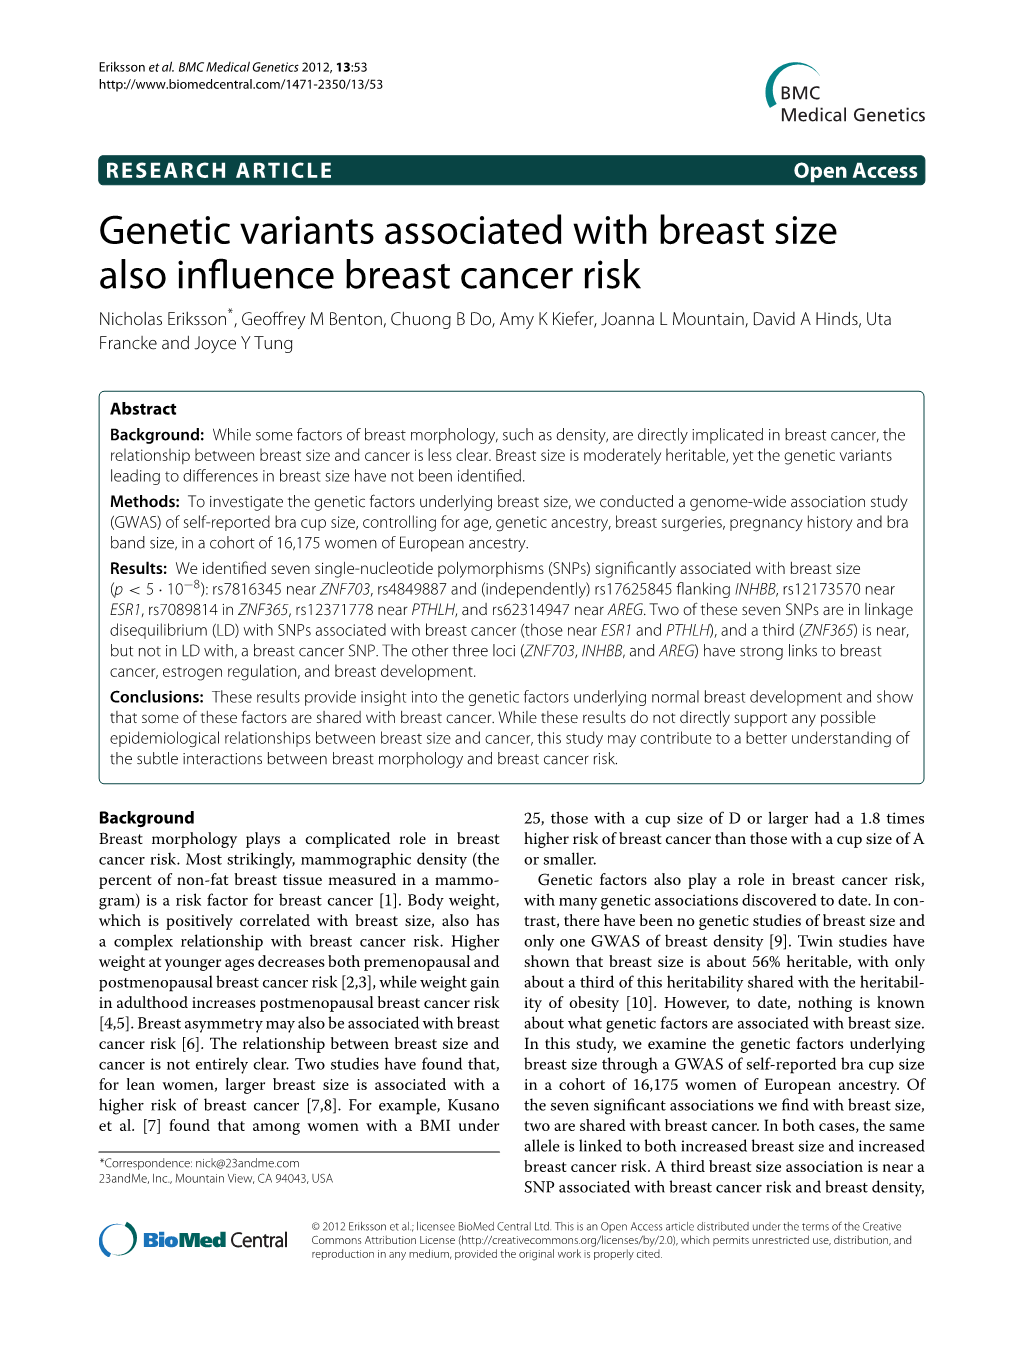 Genetic Variants Associated with Breast Size Also